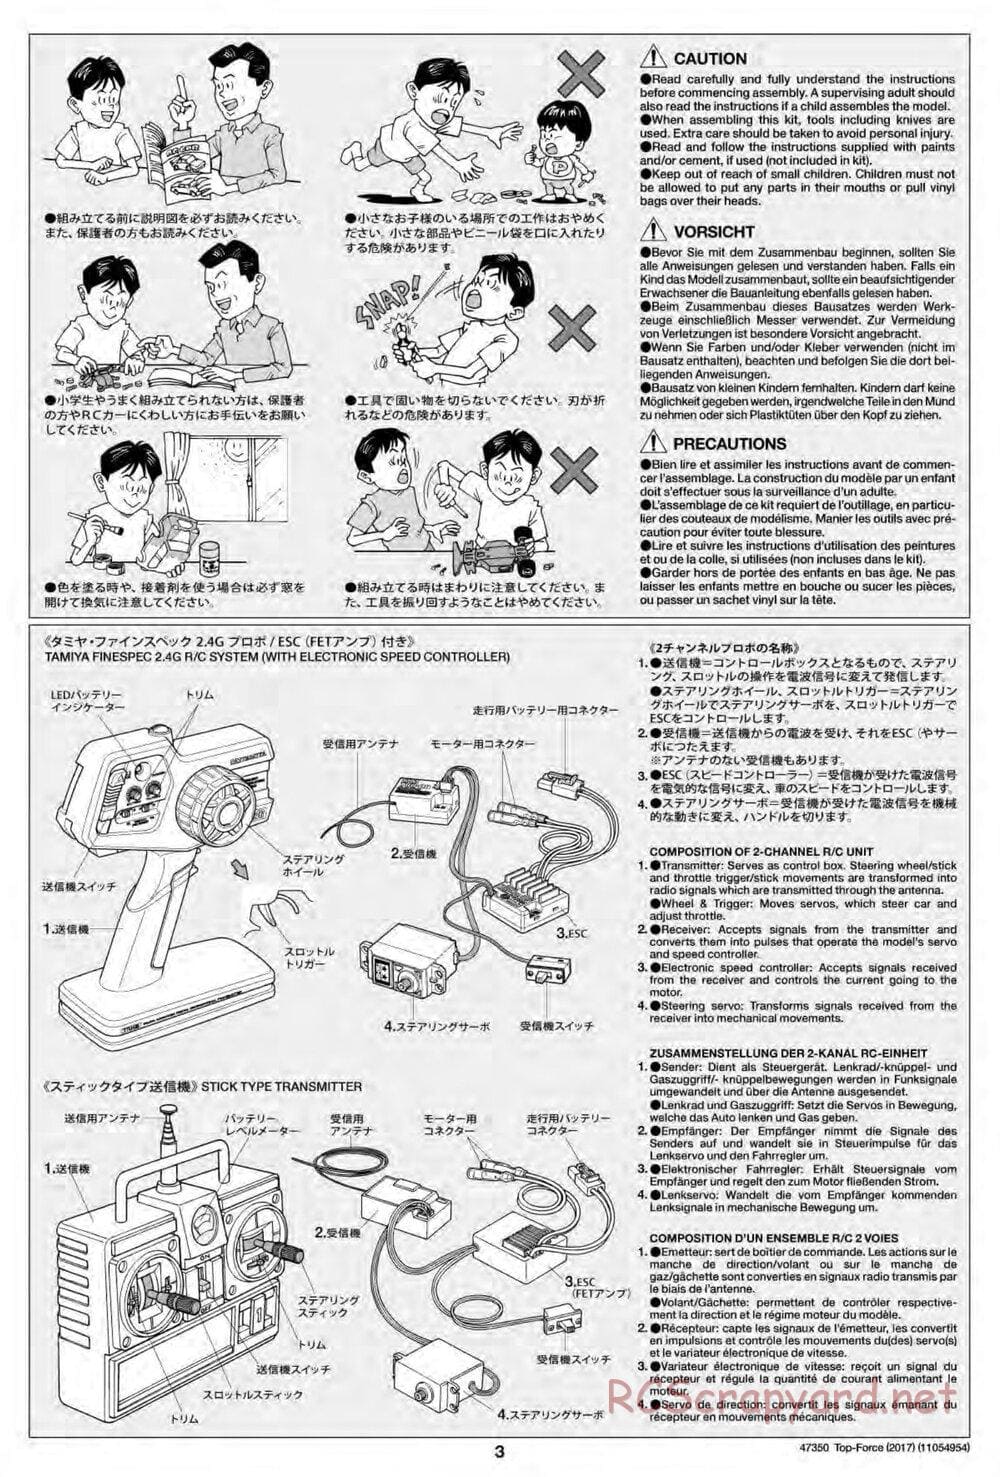 Tamiya - Top Force 2017 - DF-01 Chassis - Manual - Page 3